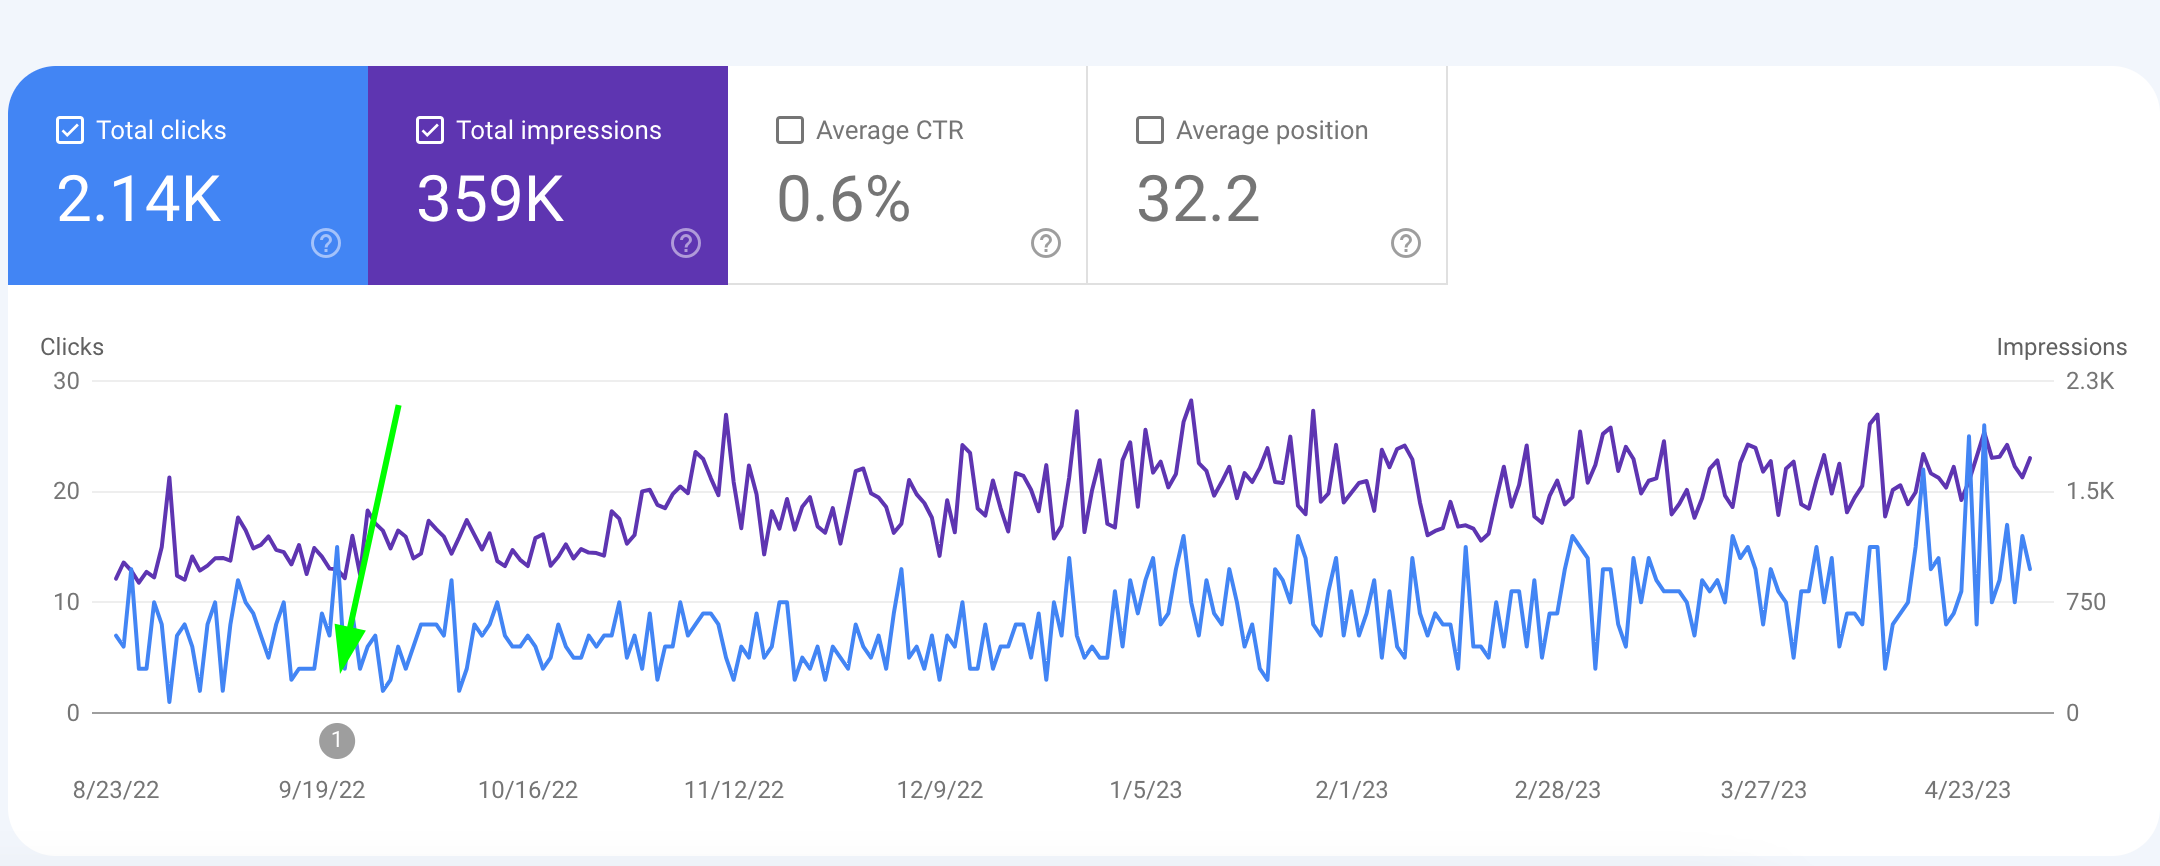 Double-Checking Initial Web Analytics